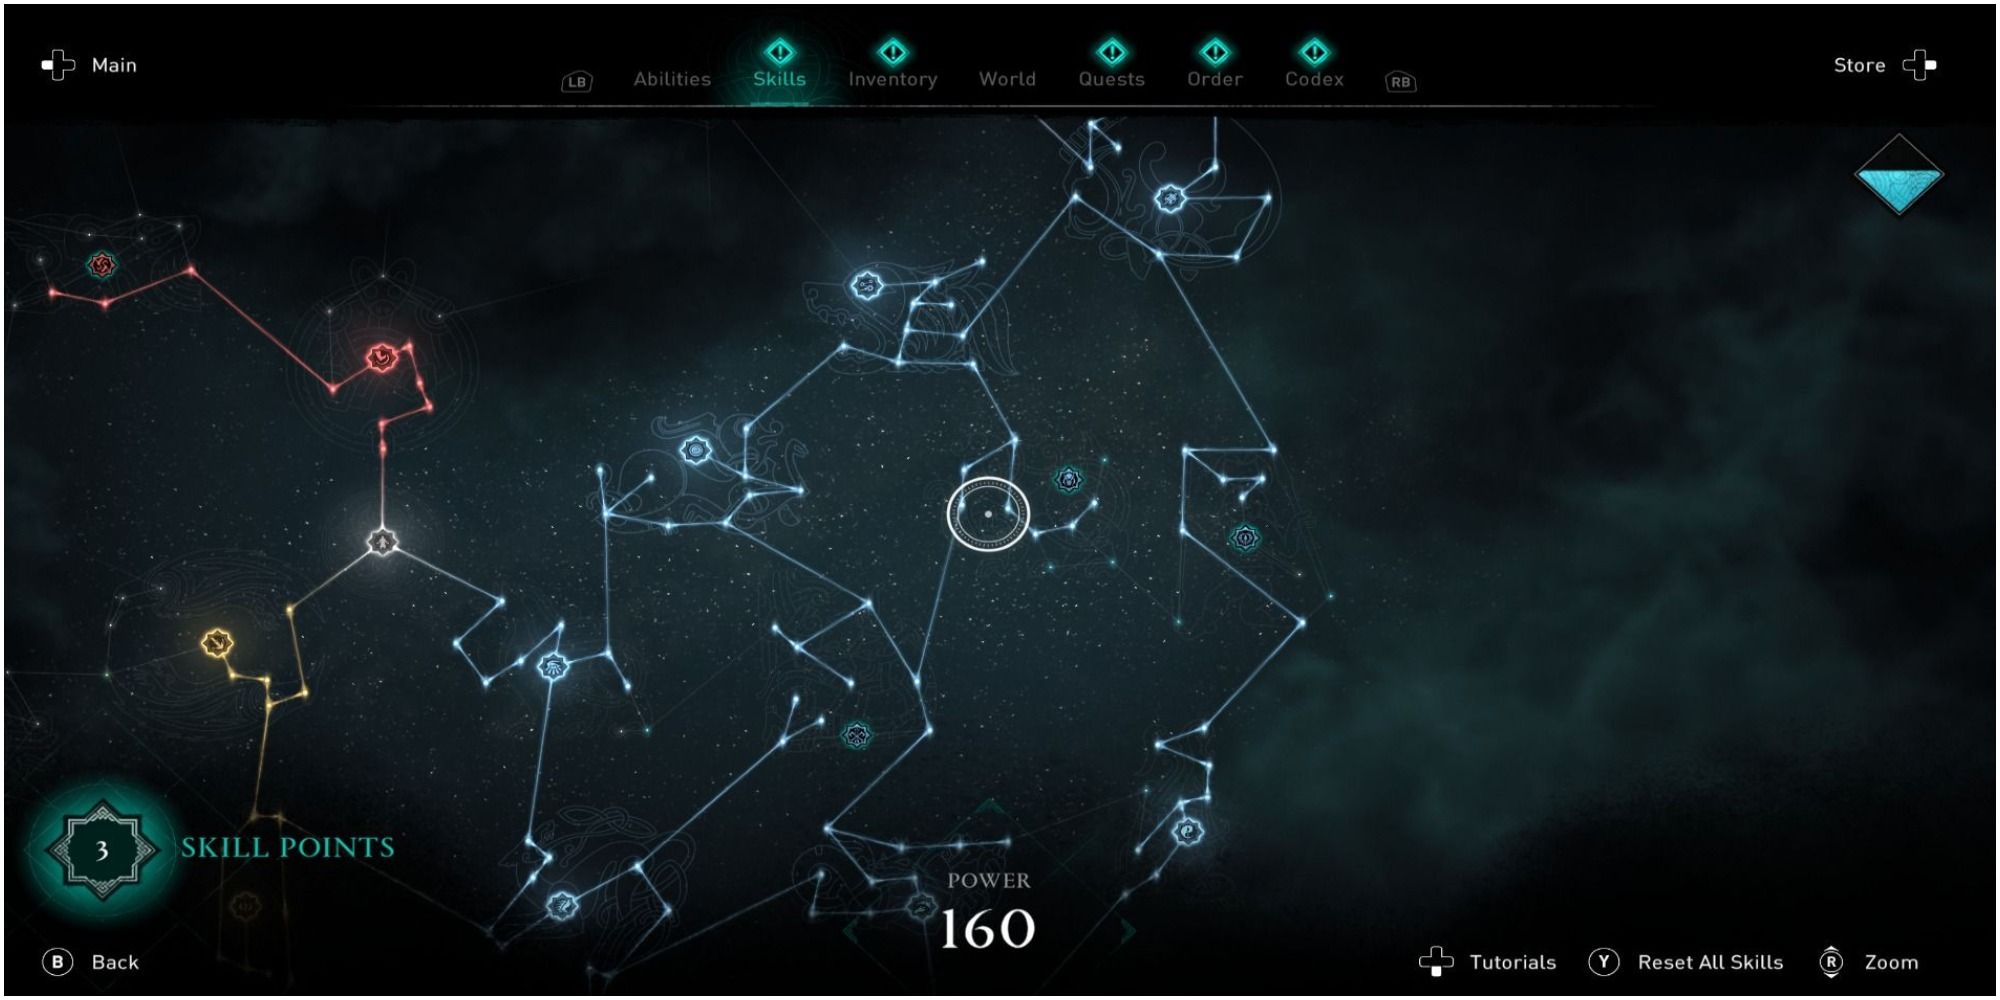 Assassin's Creed Valhalla Way Of The Wolf Skill Tree Mostly Filled Out